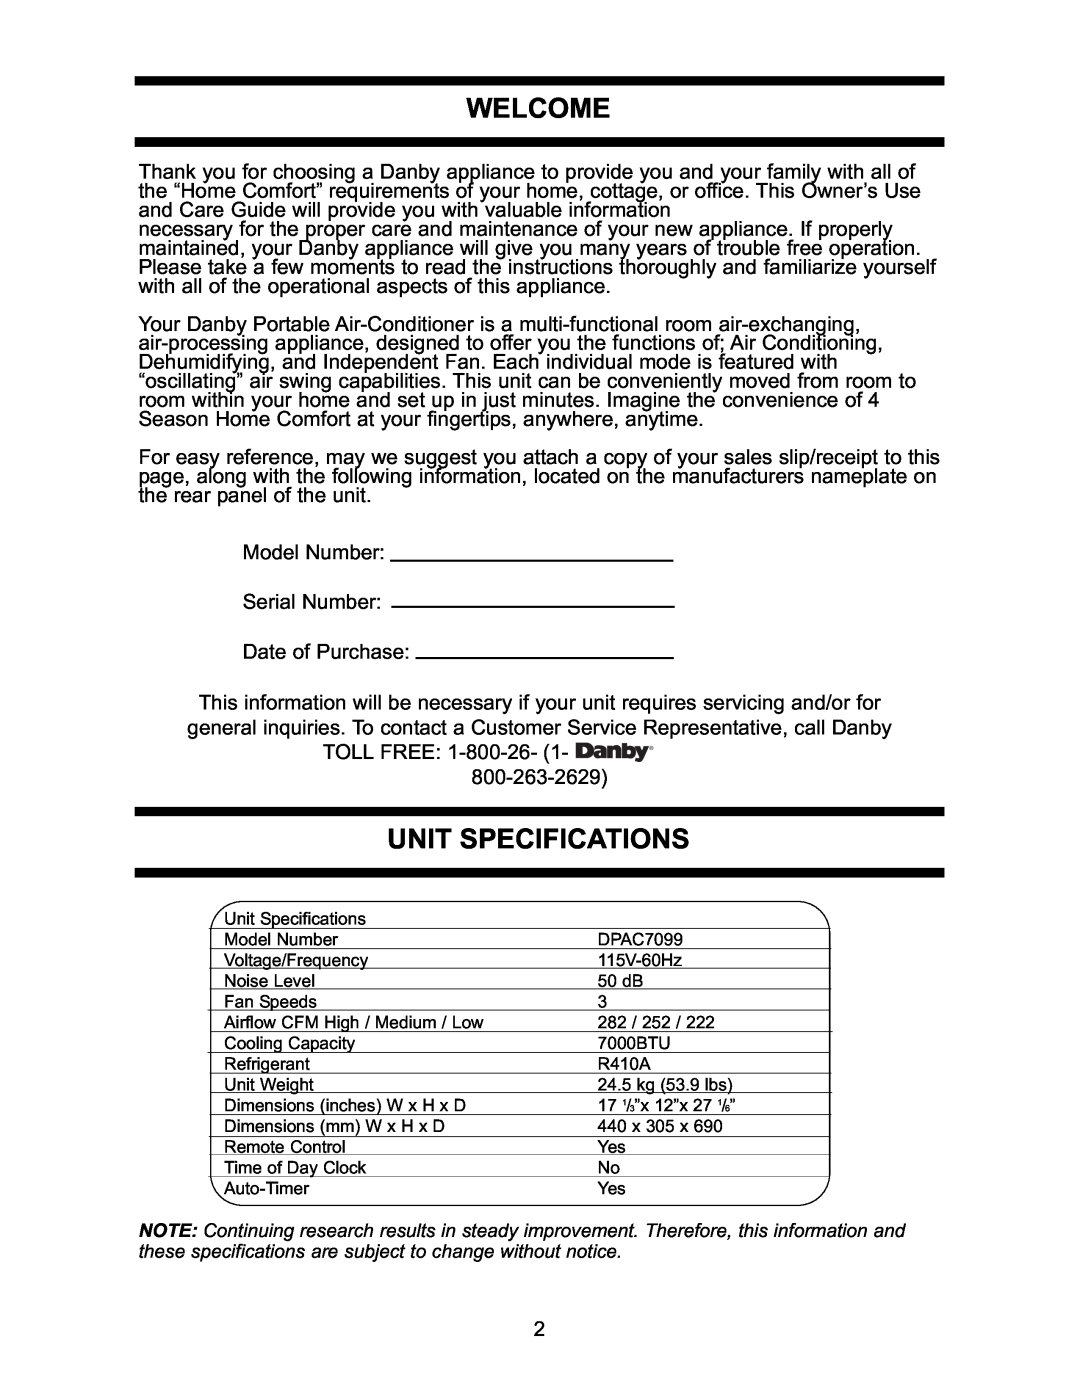 Danby DPAC7099 operating instructions Welcome, Unit Specifications 